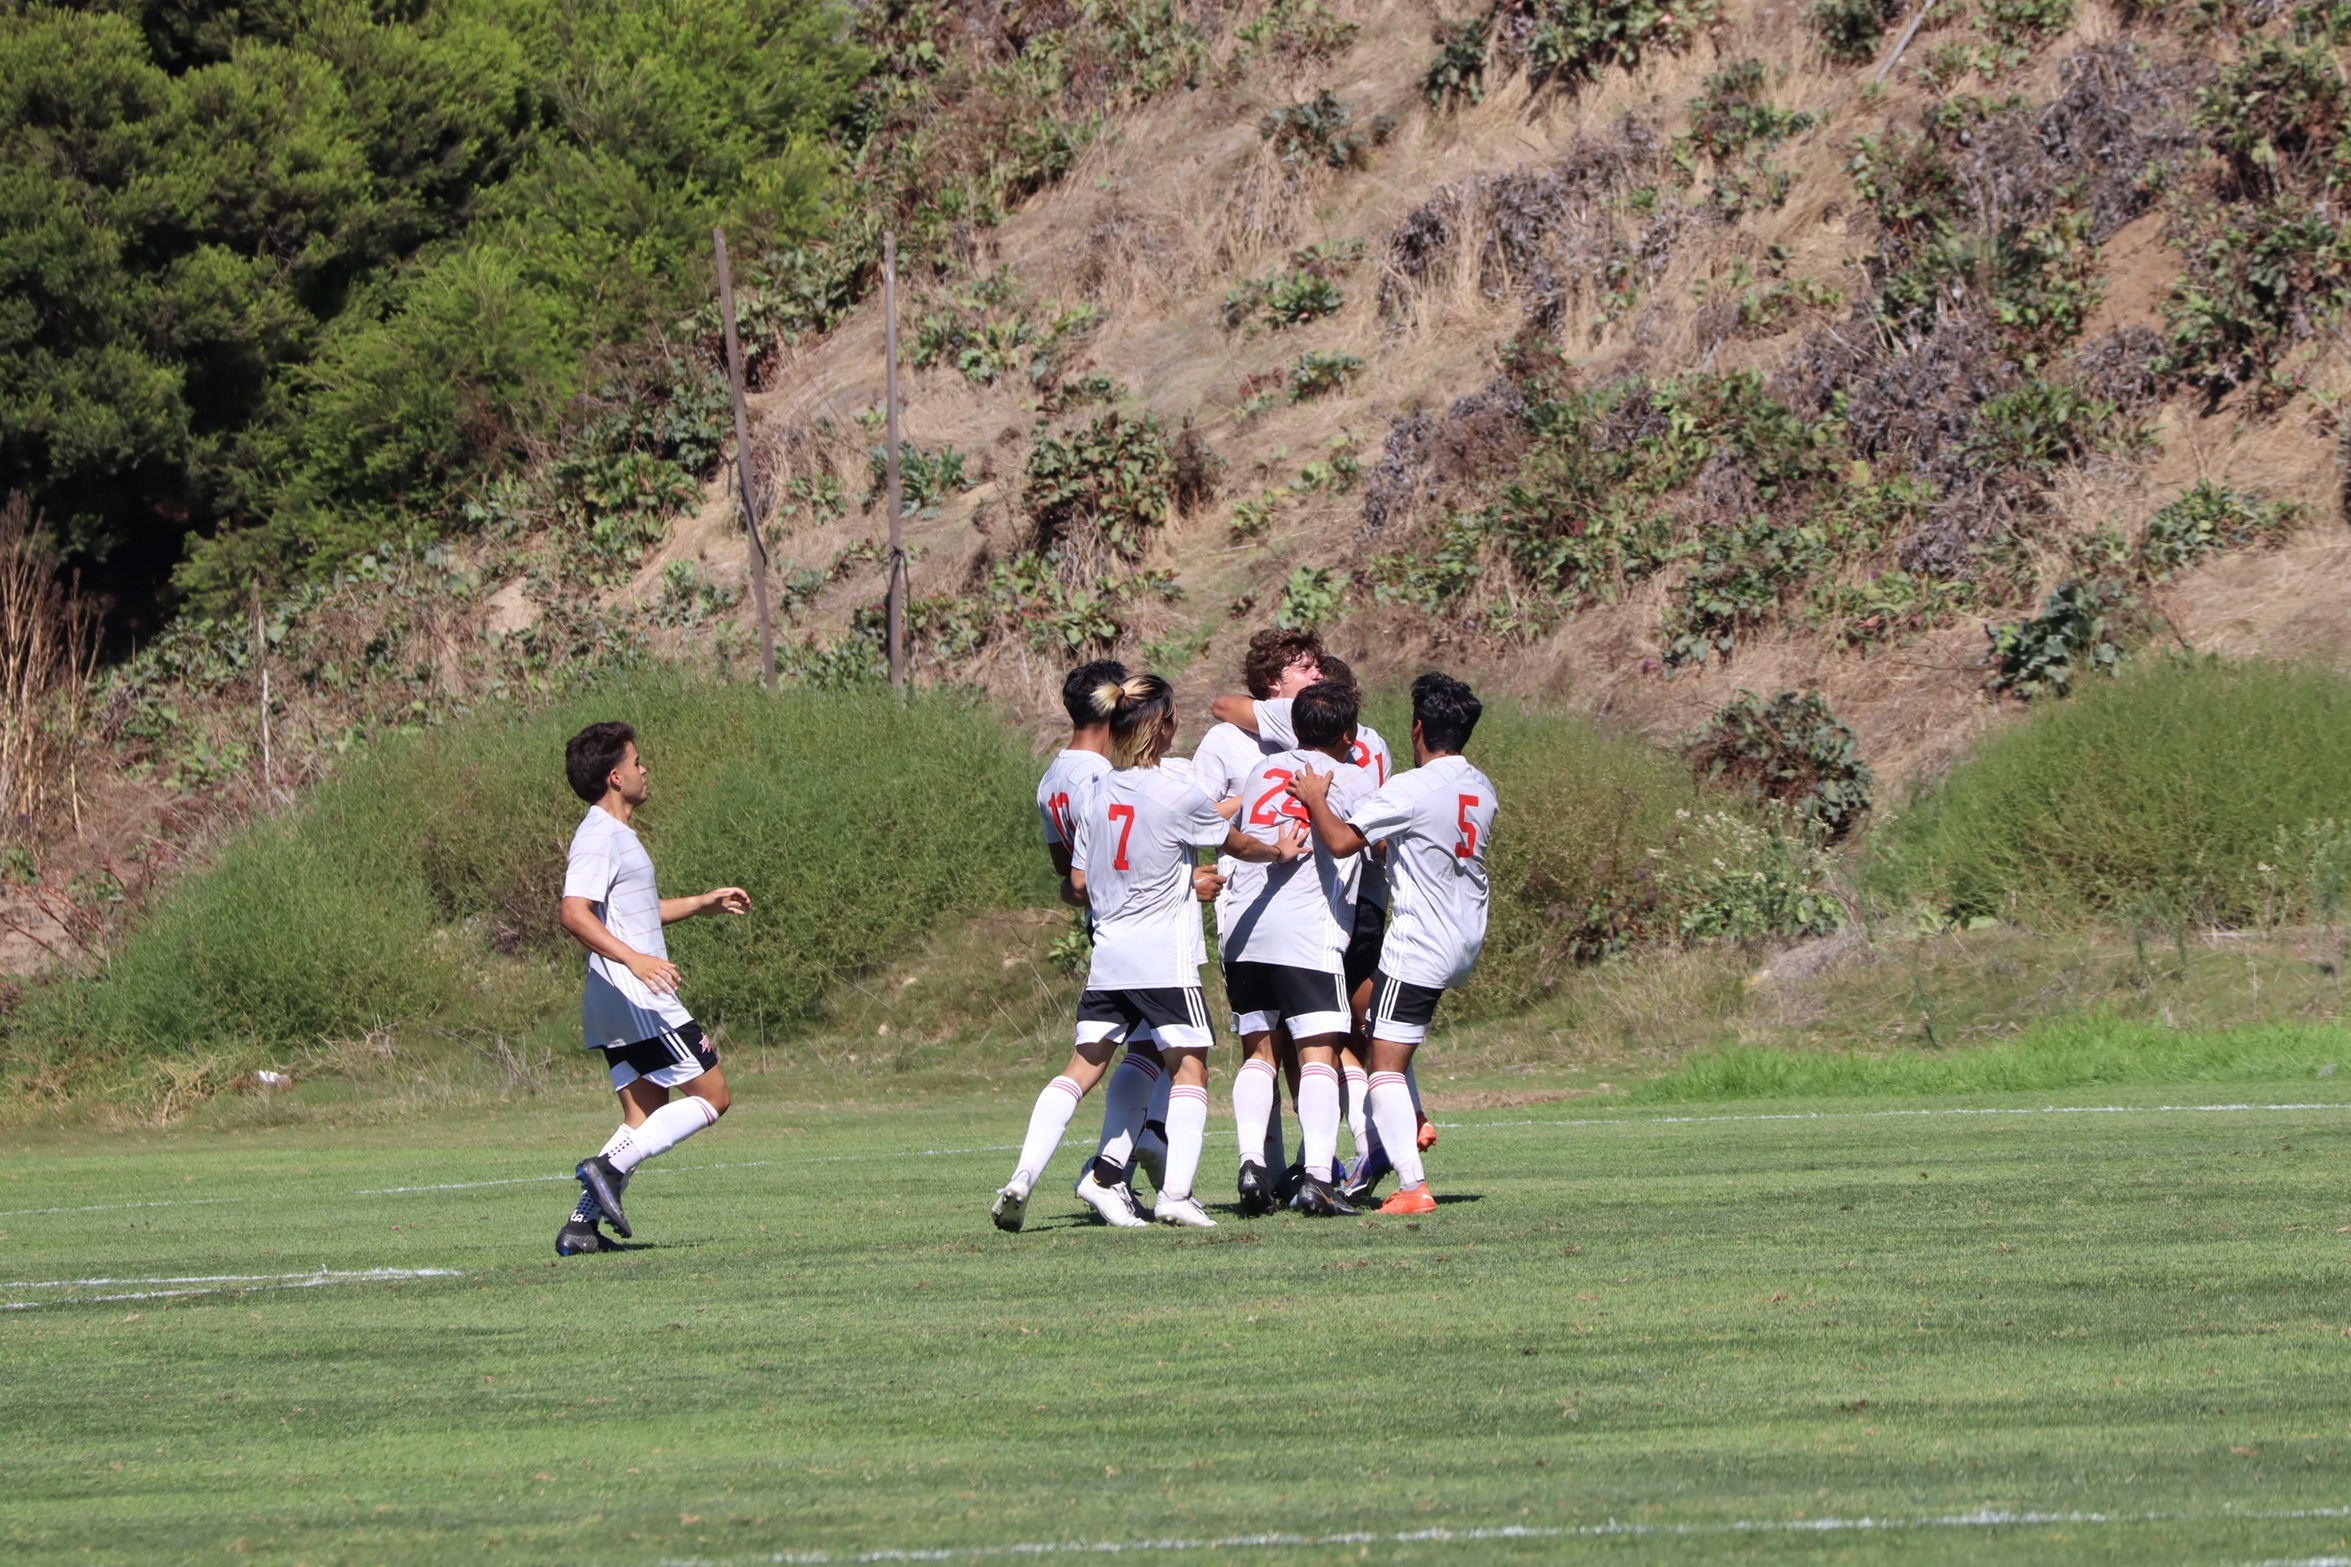 Kael Kortz scored the game-winning goal in extra time on Tuesday afternoon. Photo provided by San Diego City College Athletics.